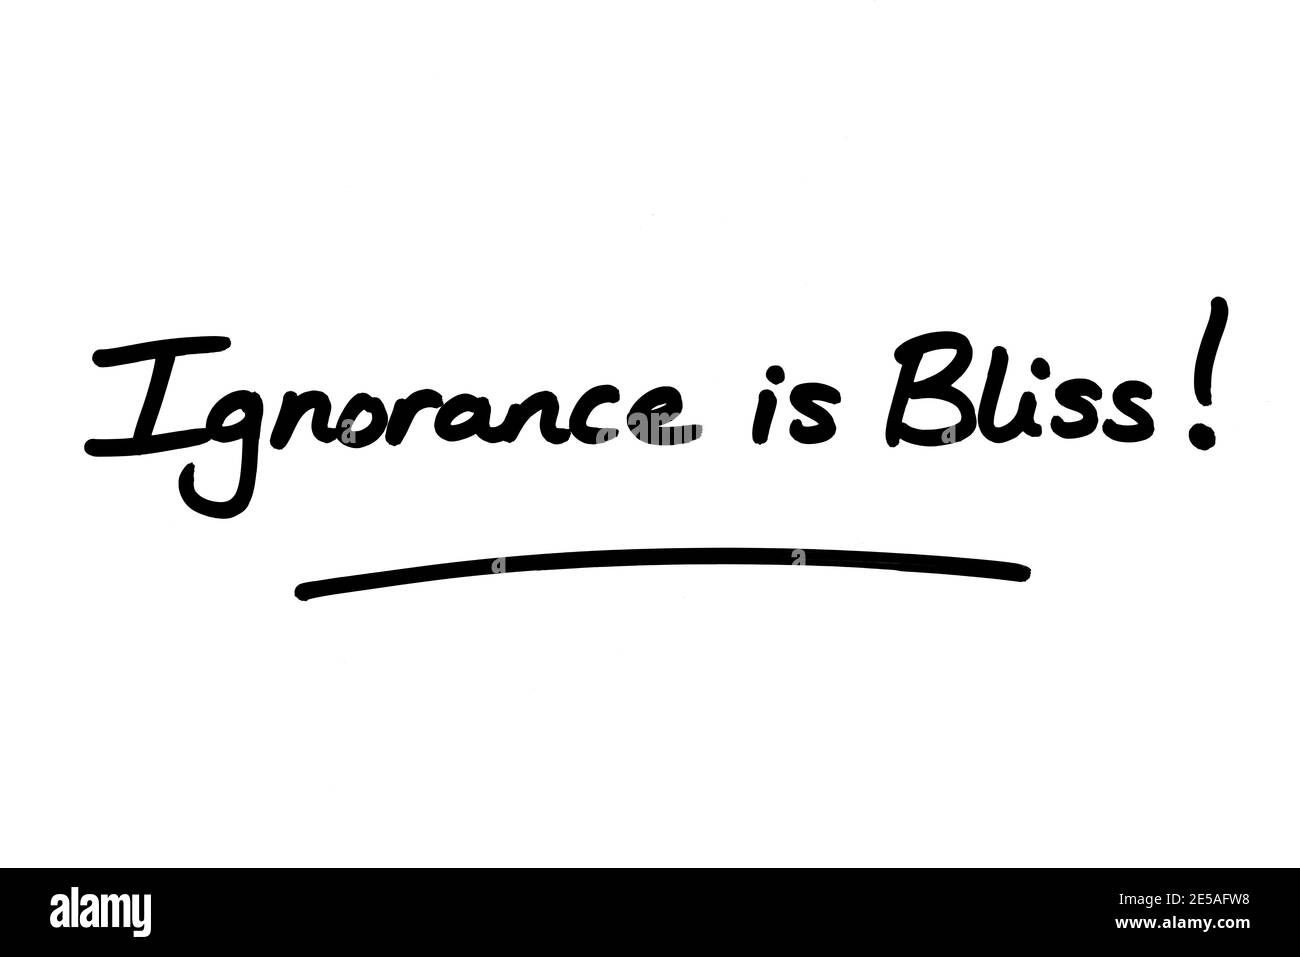 Ignorance is Bliss! handwritten on a white background. Stock Photo